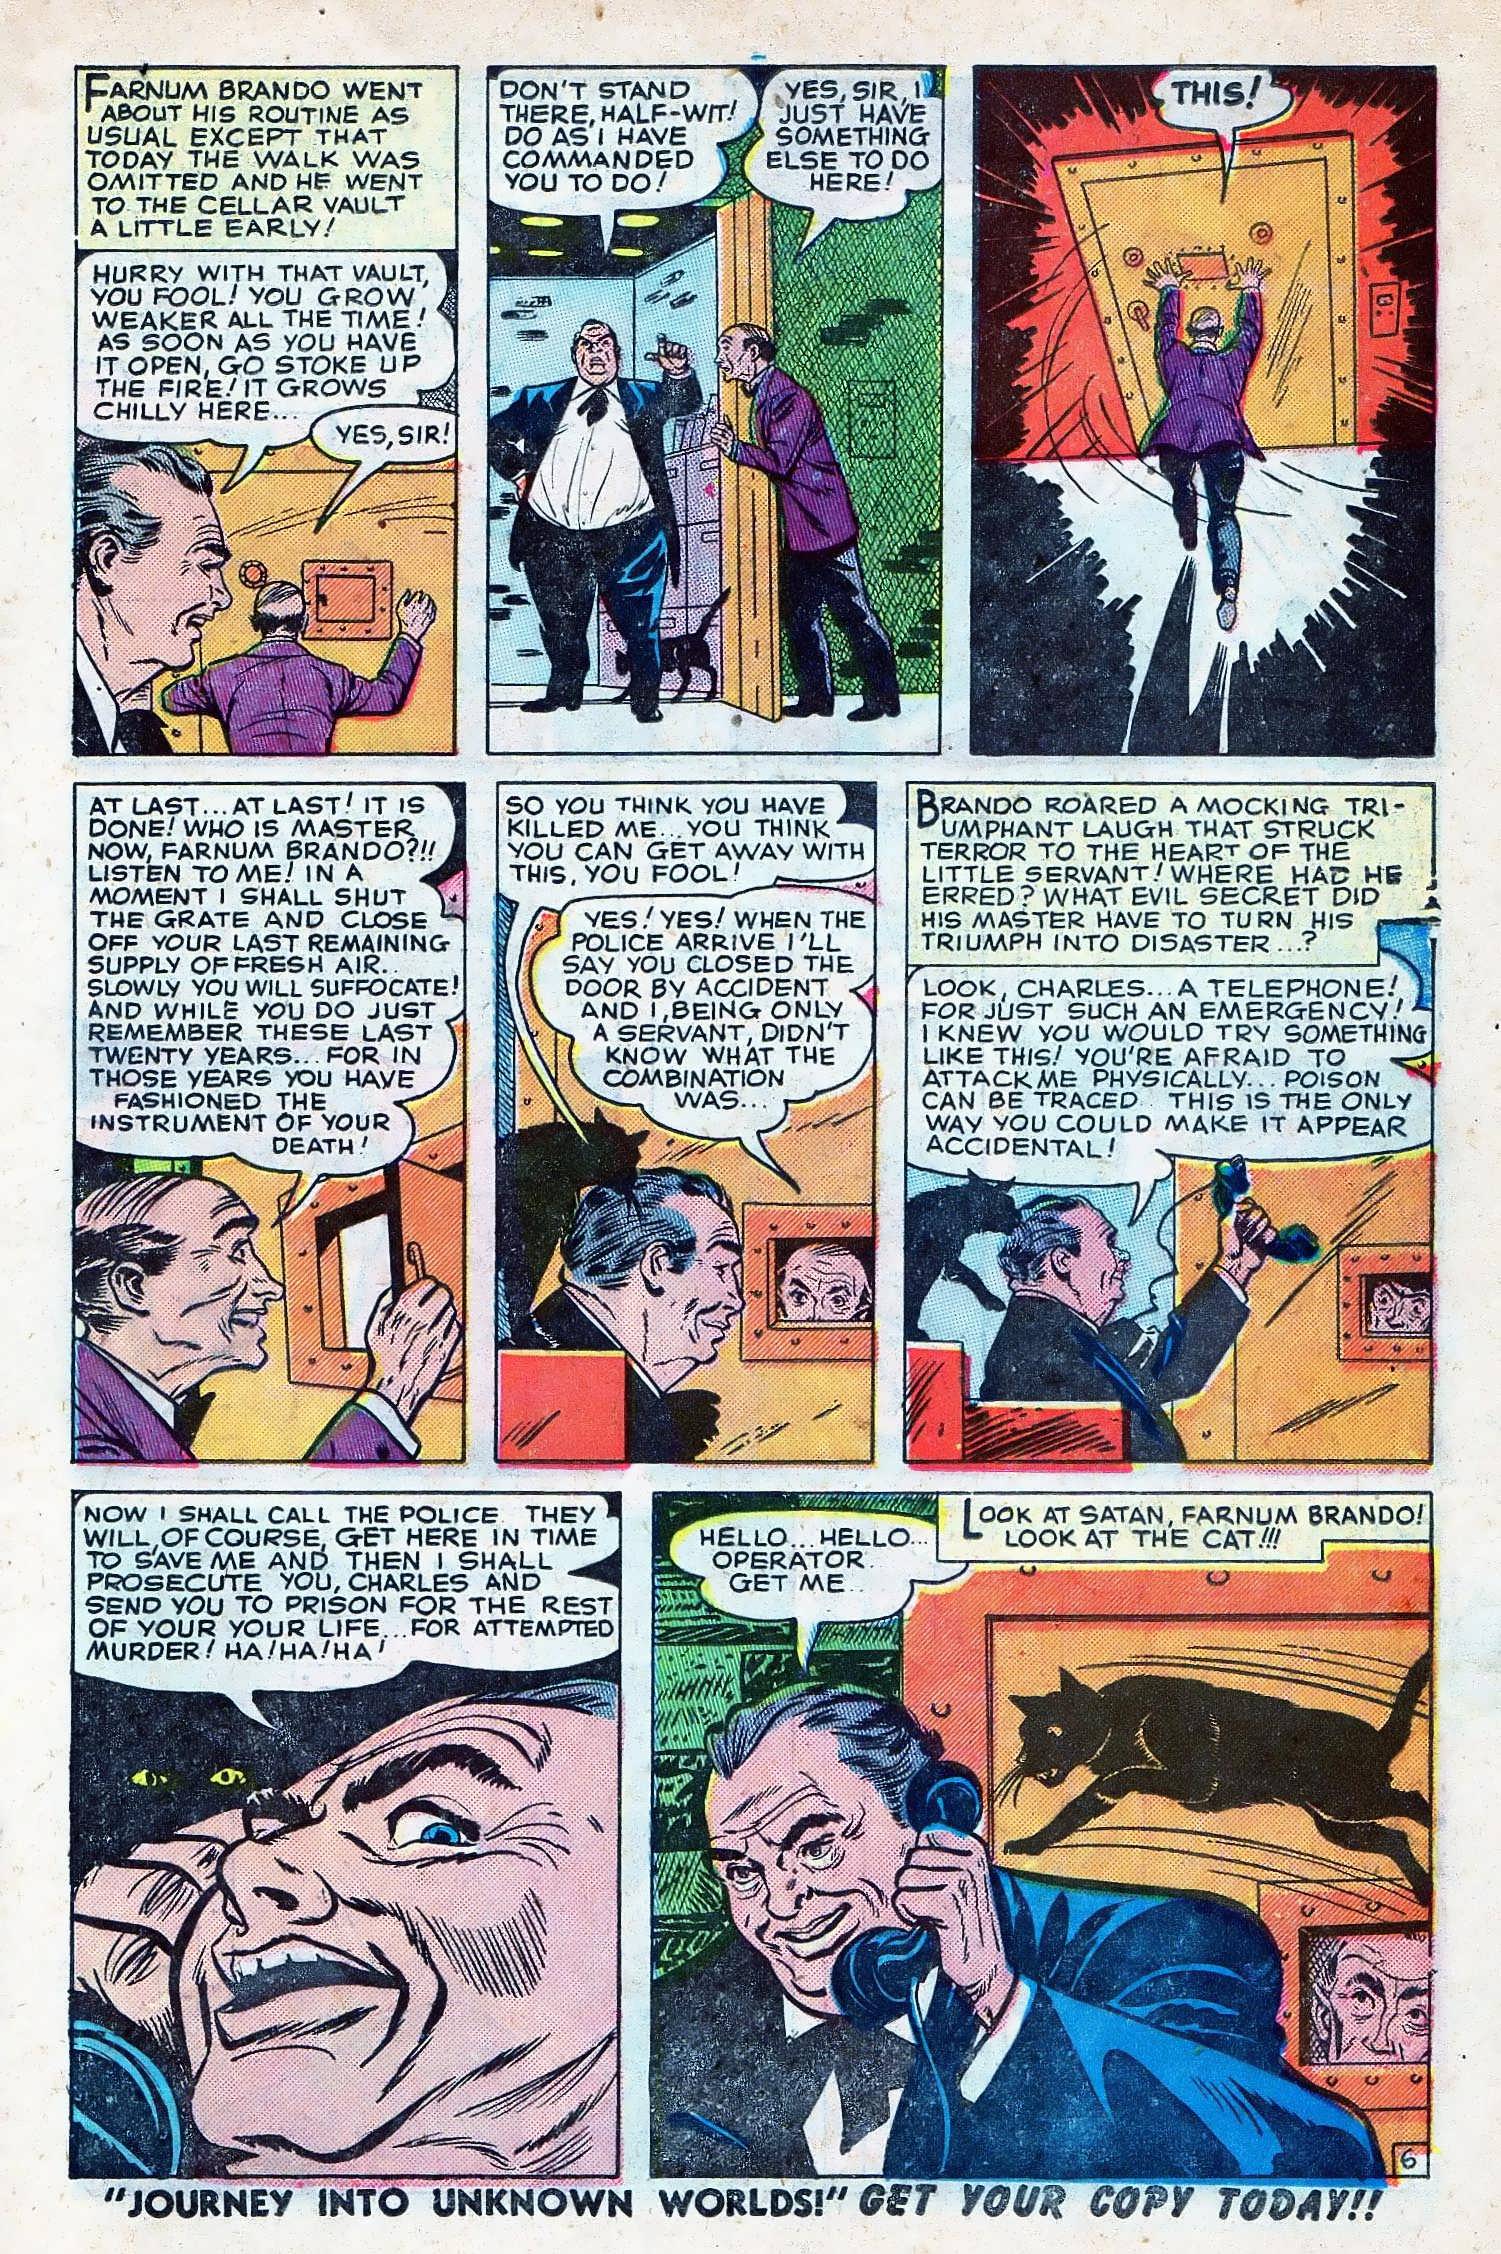 Marvel Tales (1949) 98 Page 14